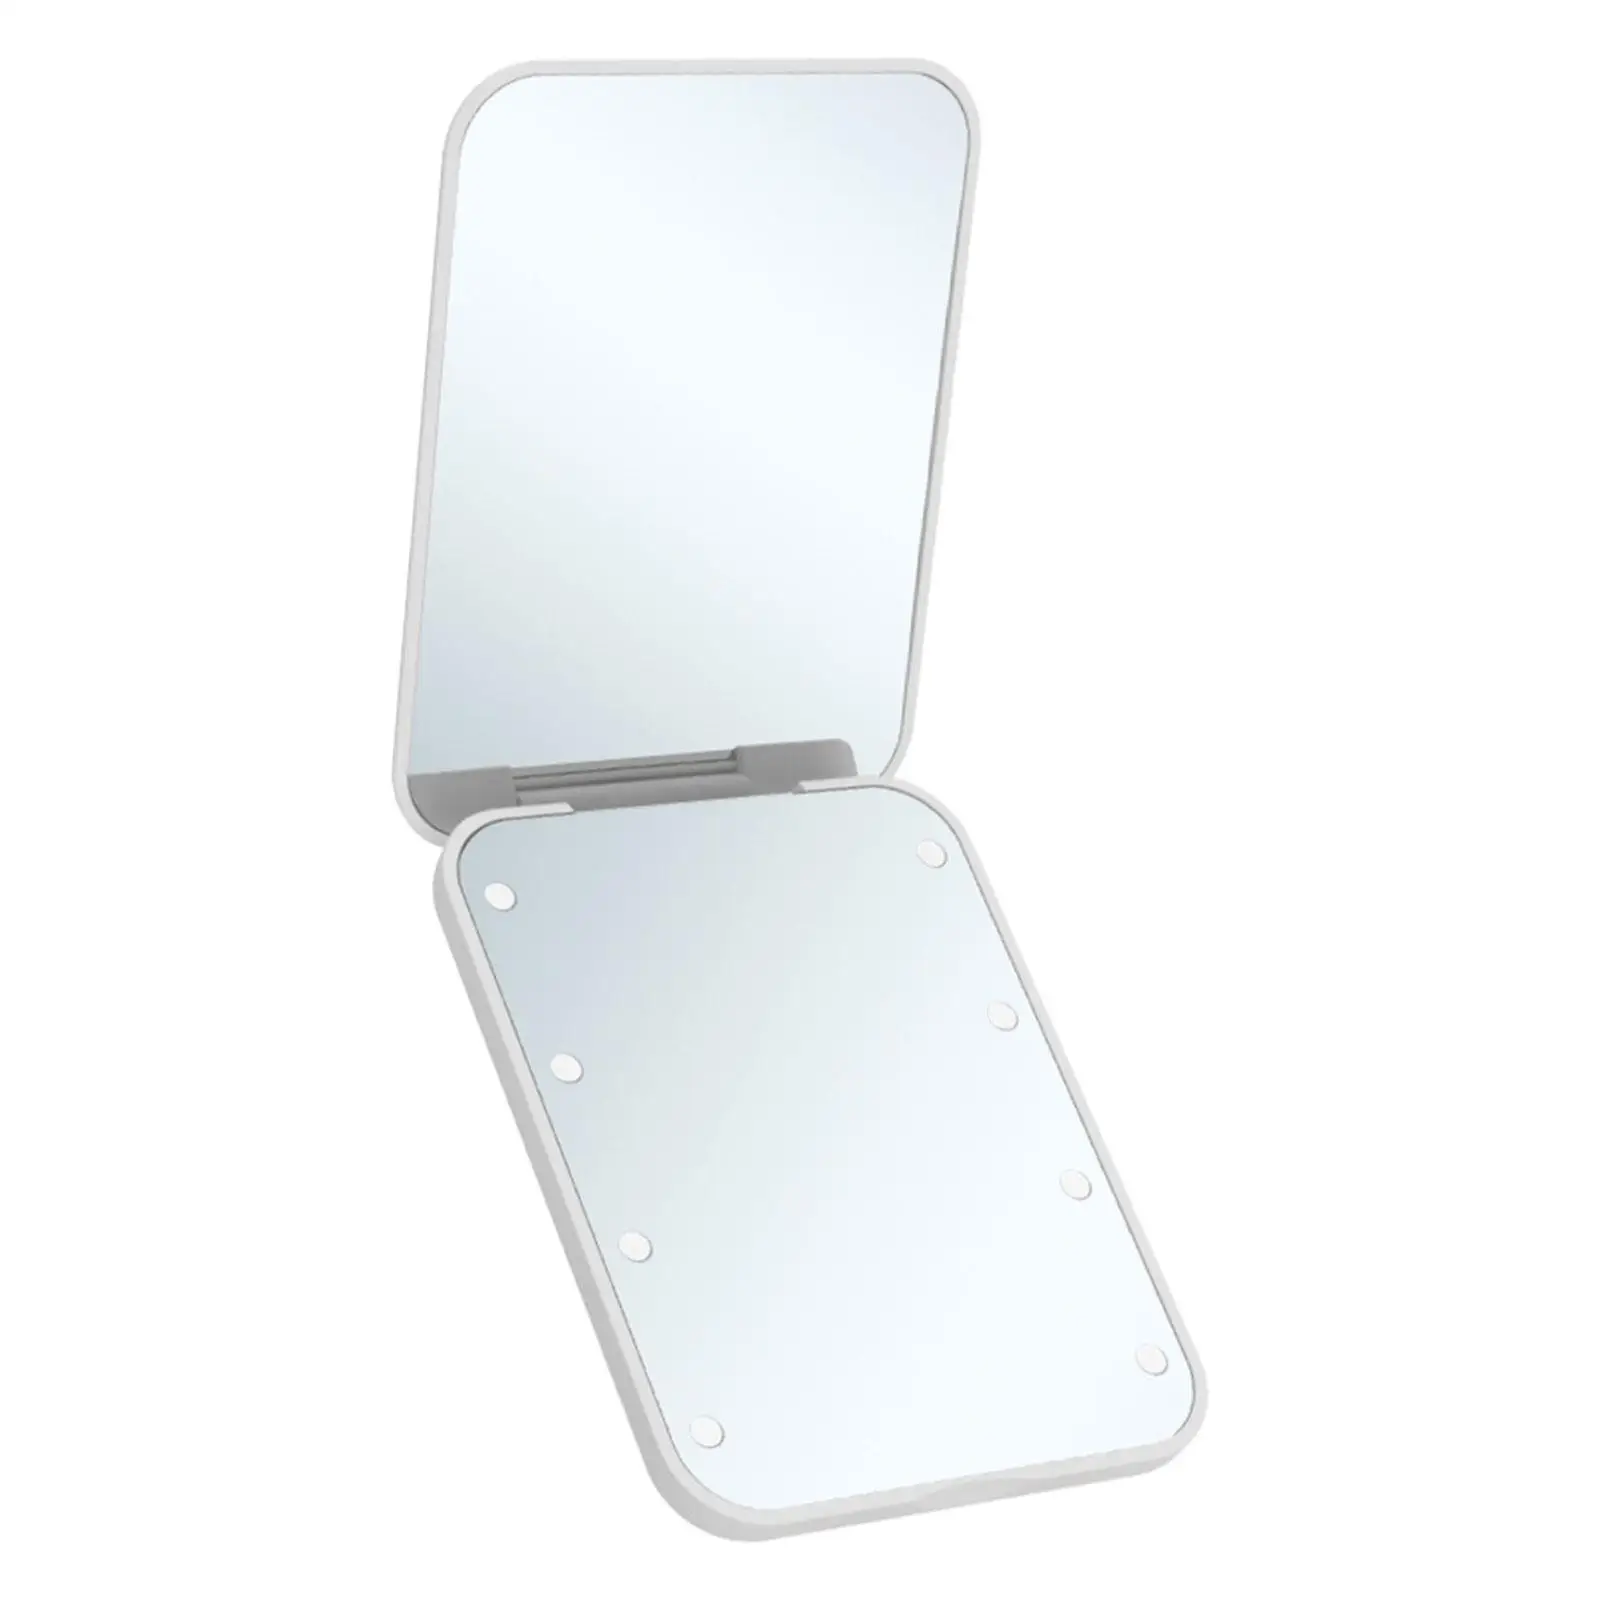 LED Makeup Mirror with 2x Magnifying Desktop Cosmetic Mirror Lighted Makeup Mirror for Travel Essential Bedroom Vanity Dormitory